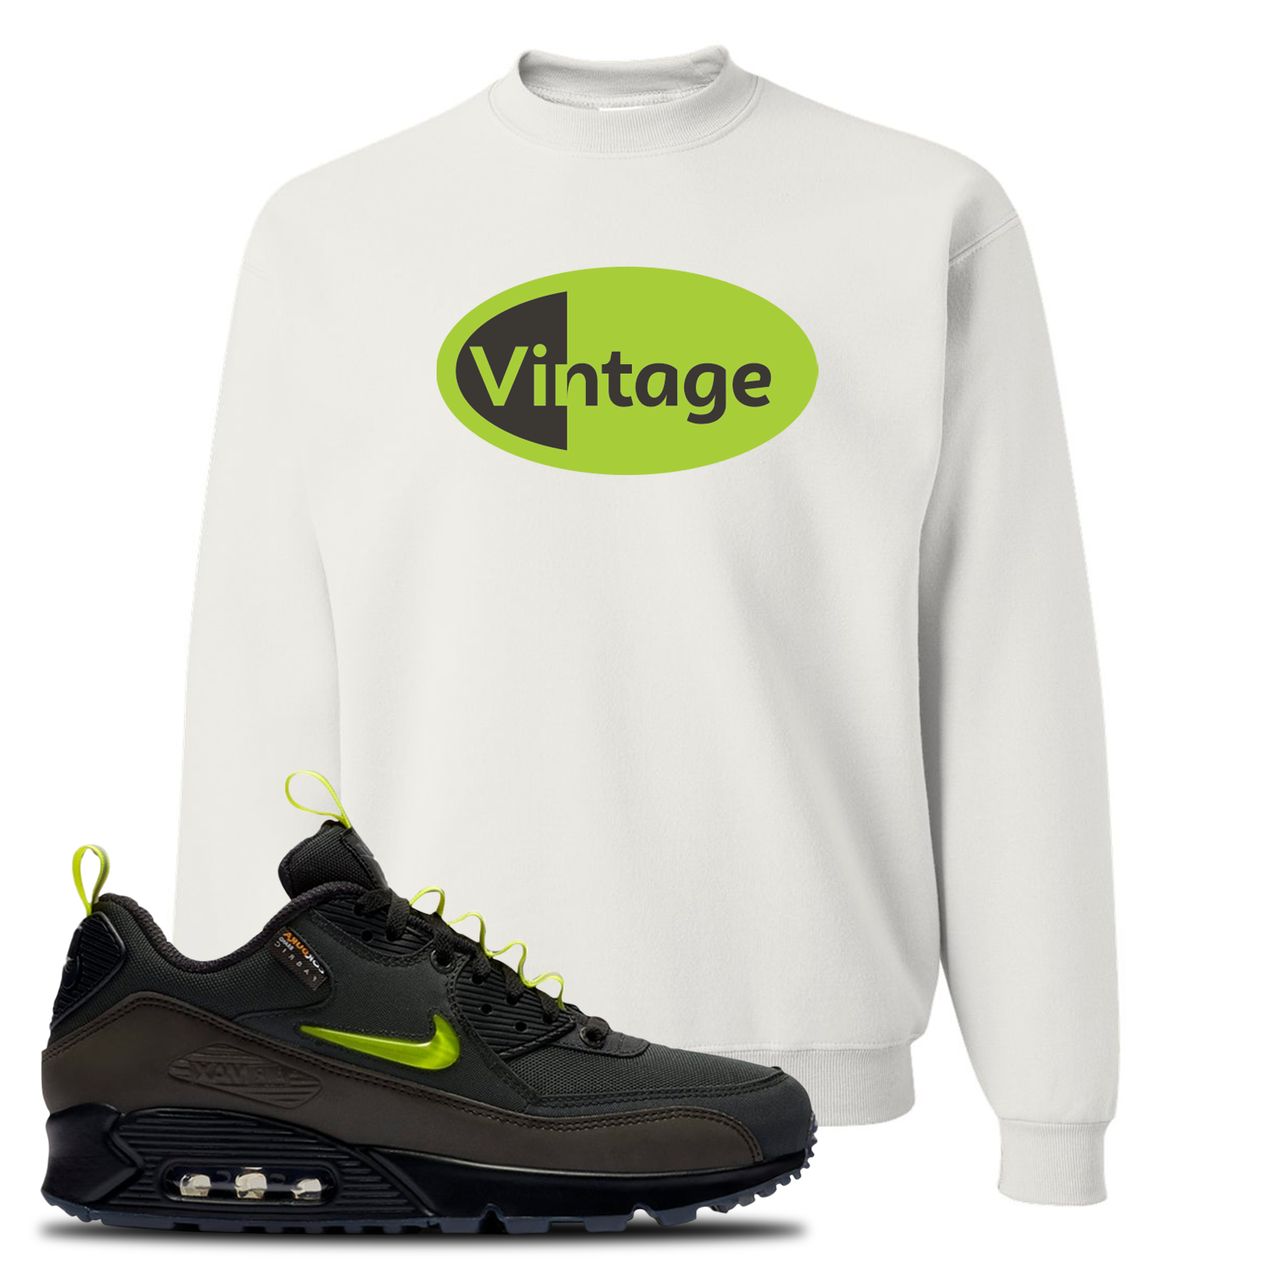 The Basement X Air Max 90 Manchester Vintage Oval White Sneaker Hook Up Crewneck Sweatshirt